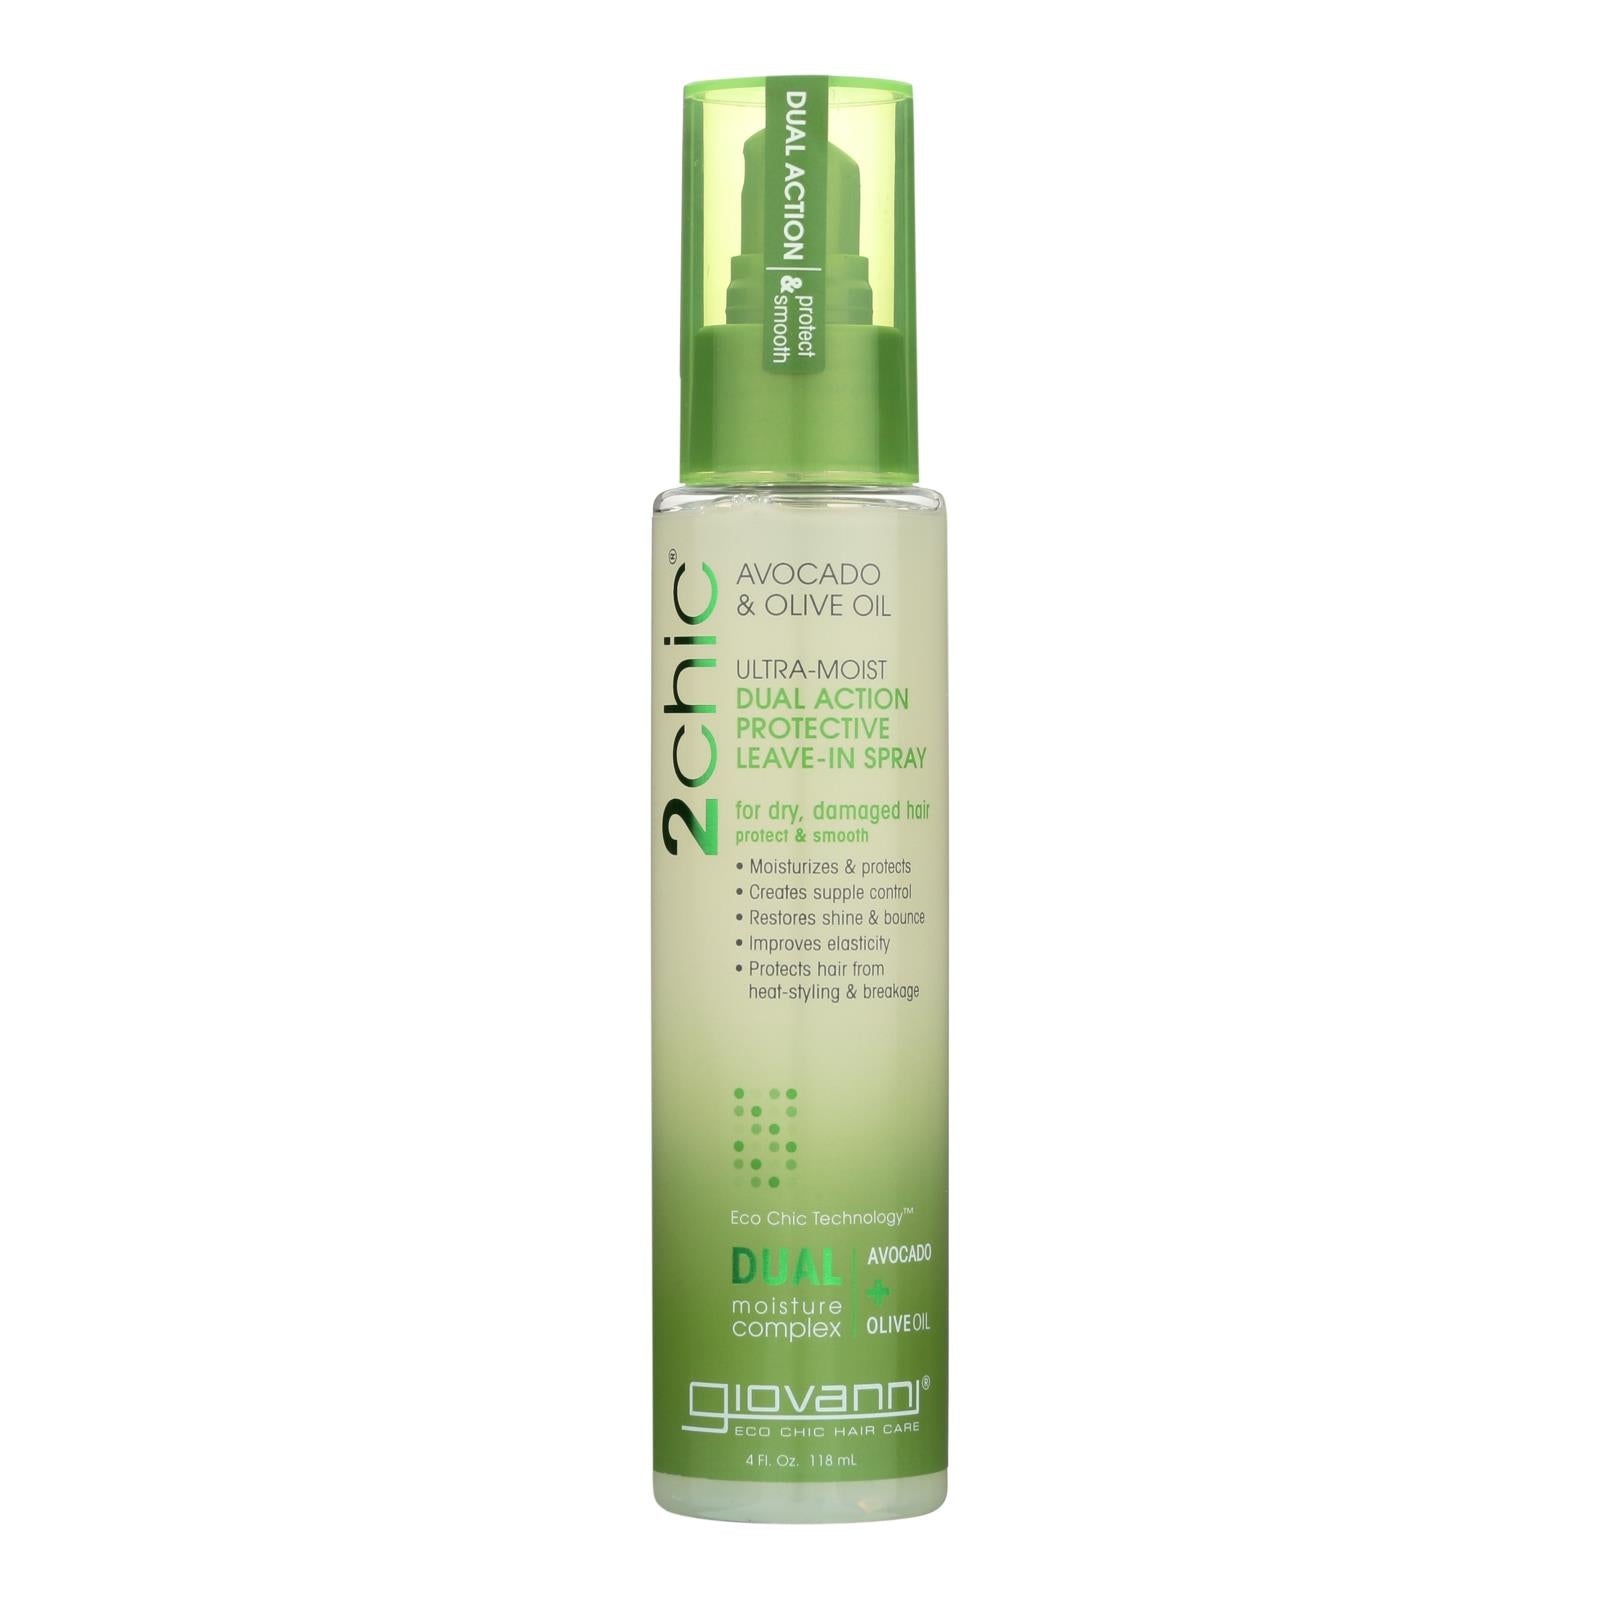 Giovanni Hair Care Products Spray Leave In Conditioner - 2chic Avocado - 4 Oz